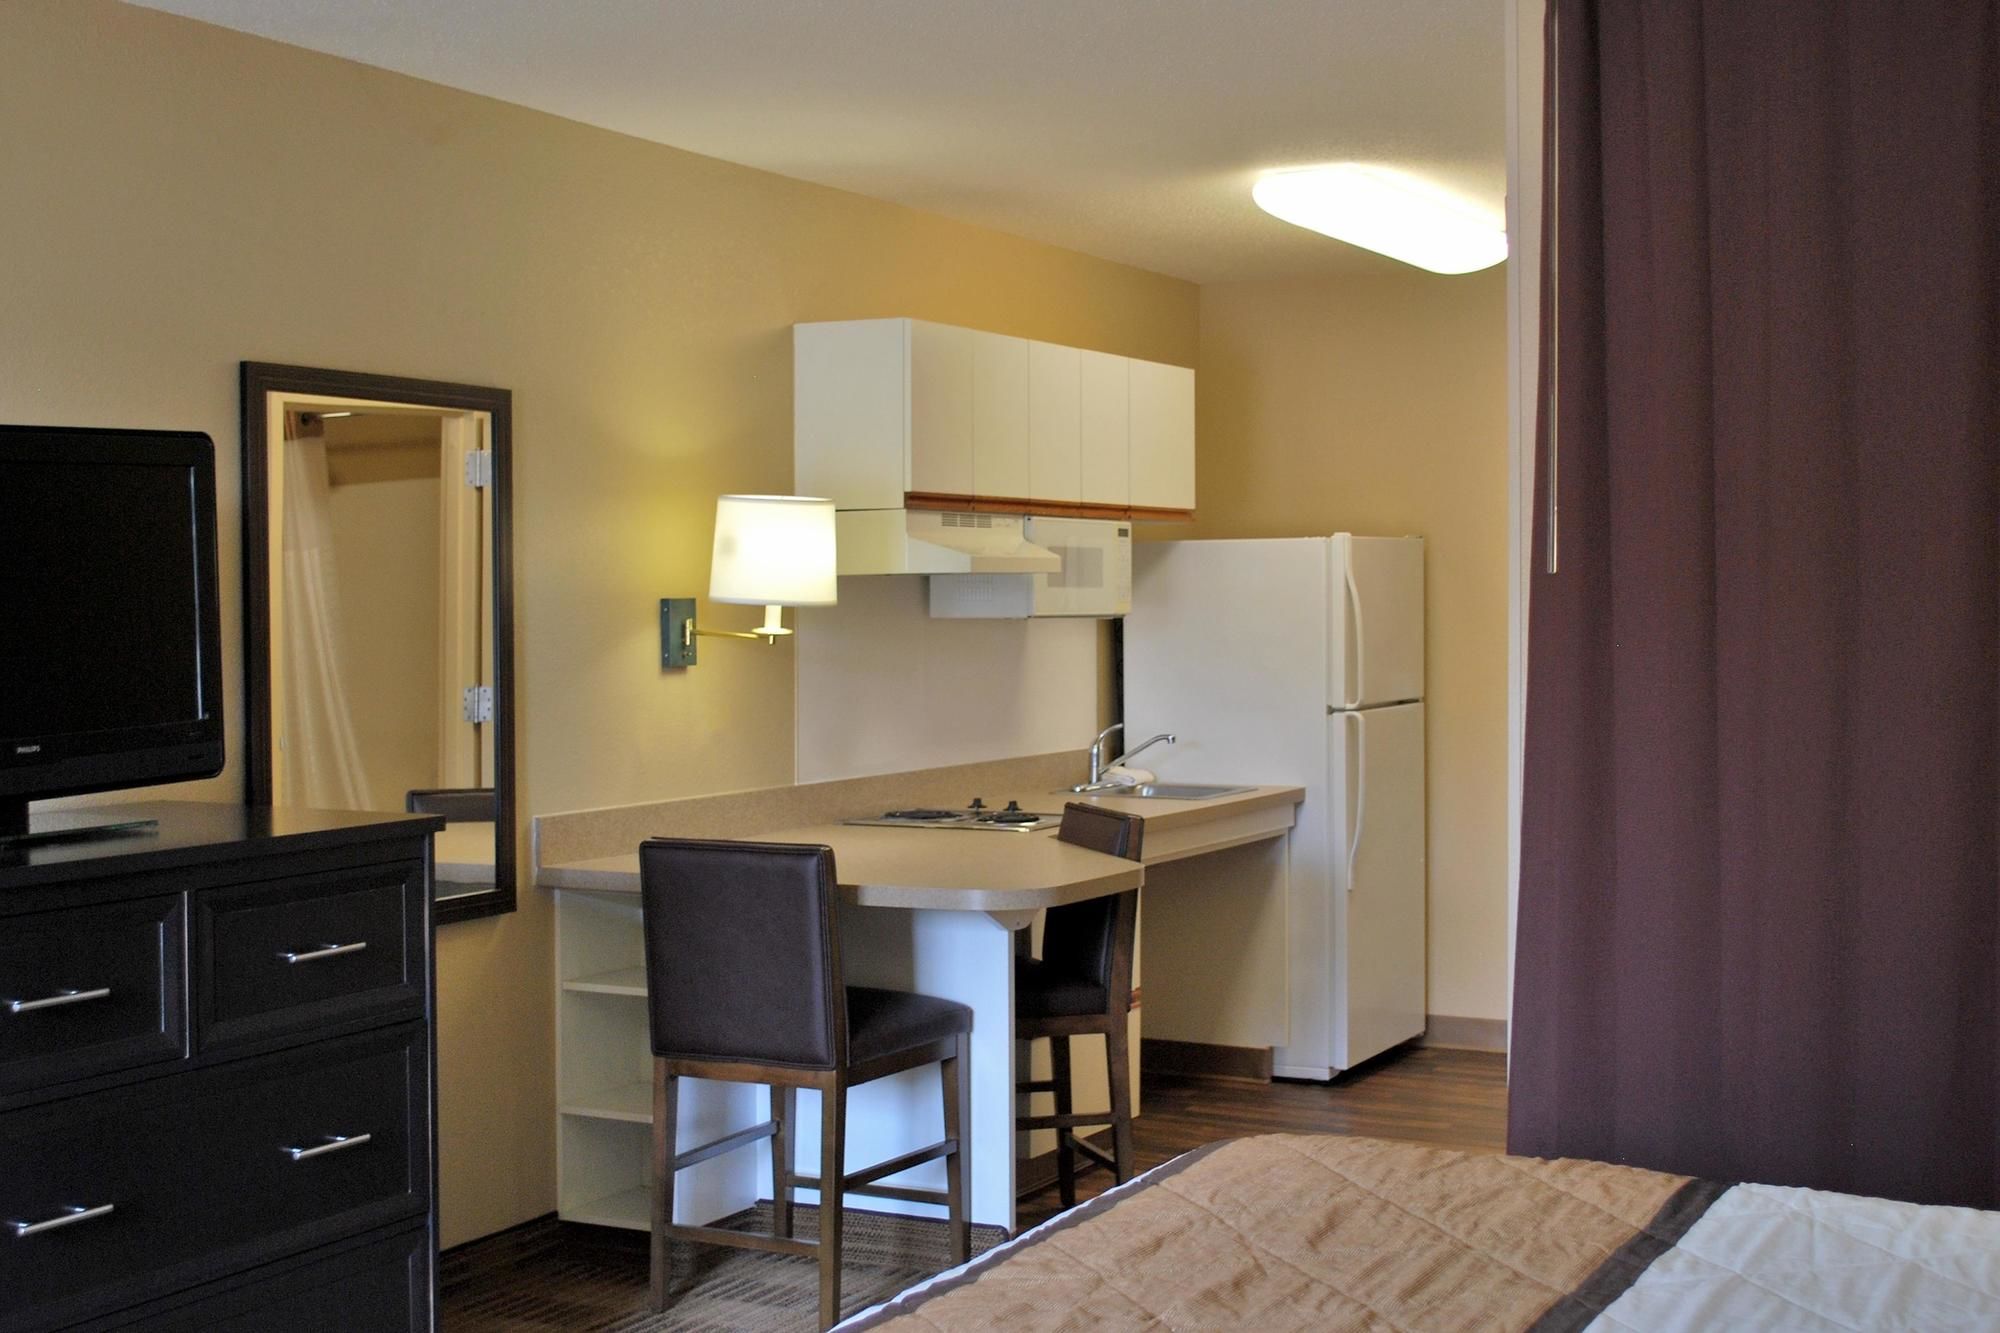 Extended Stay America Orlando Southpark Equity Row